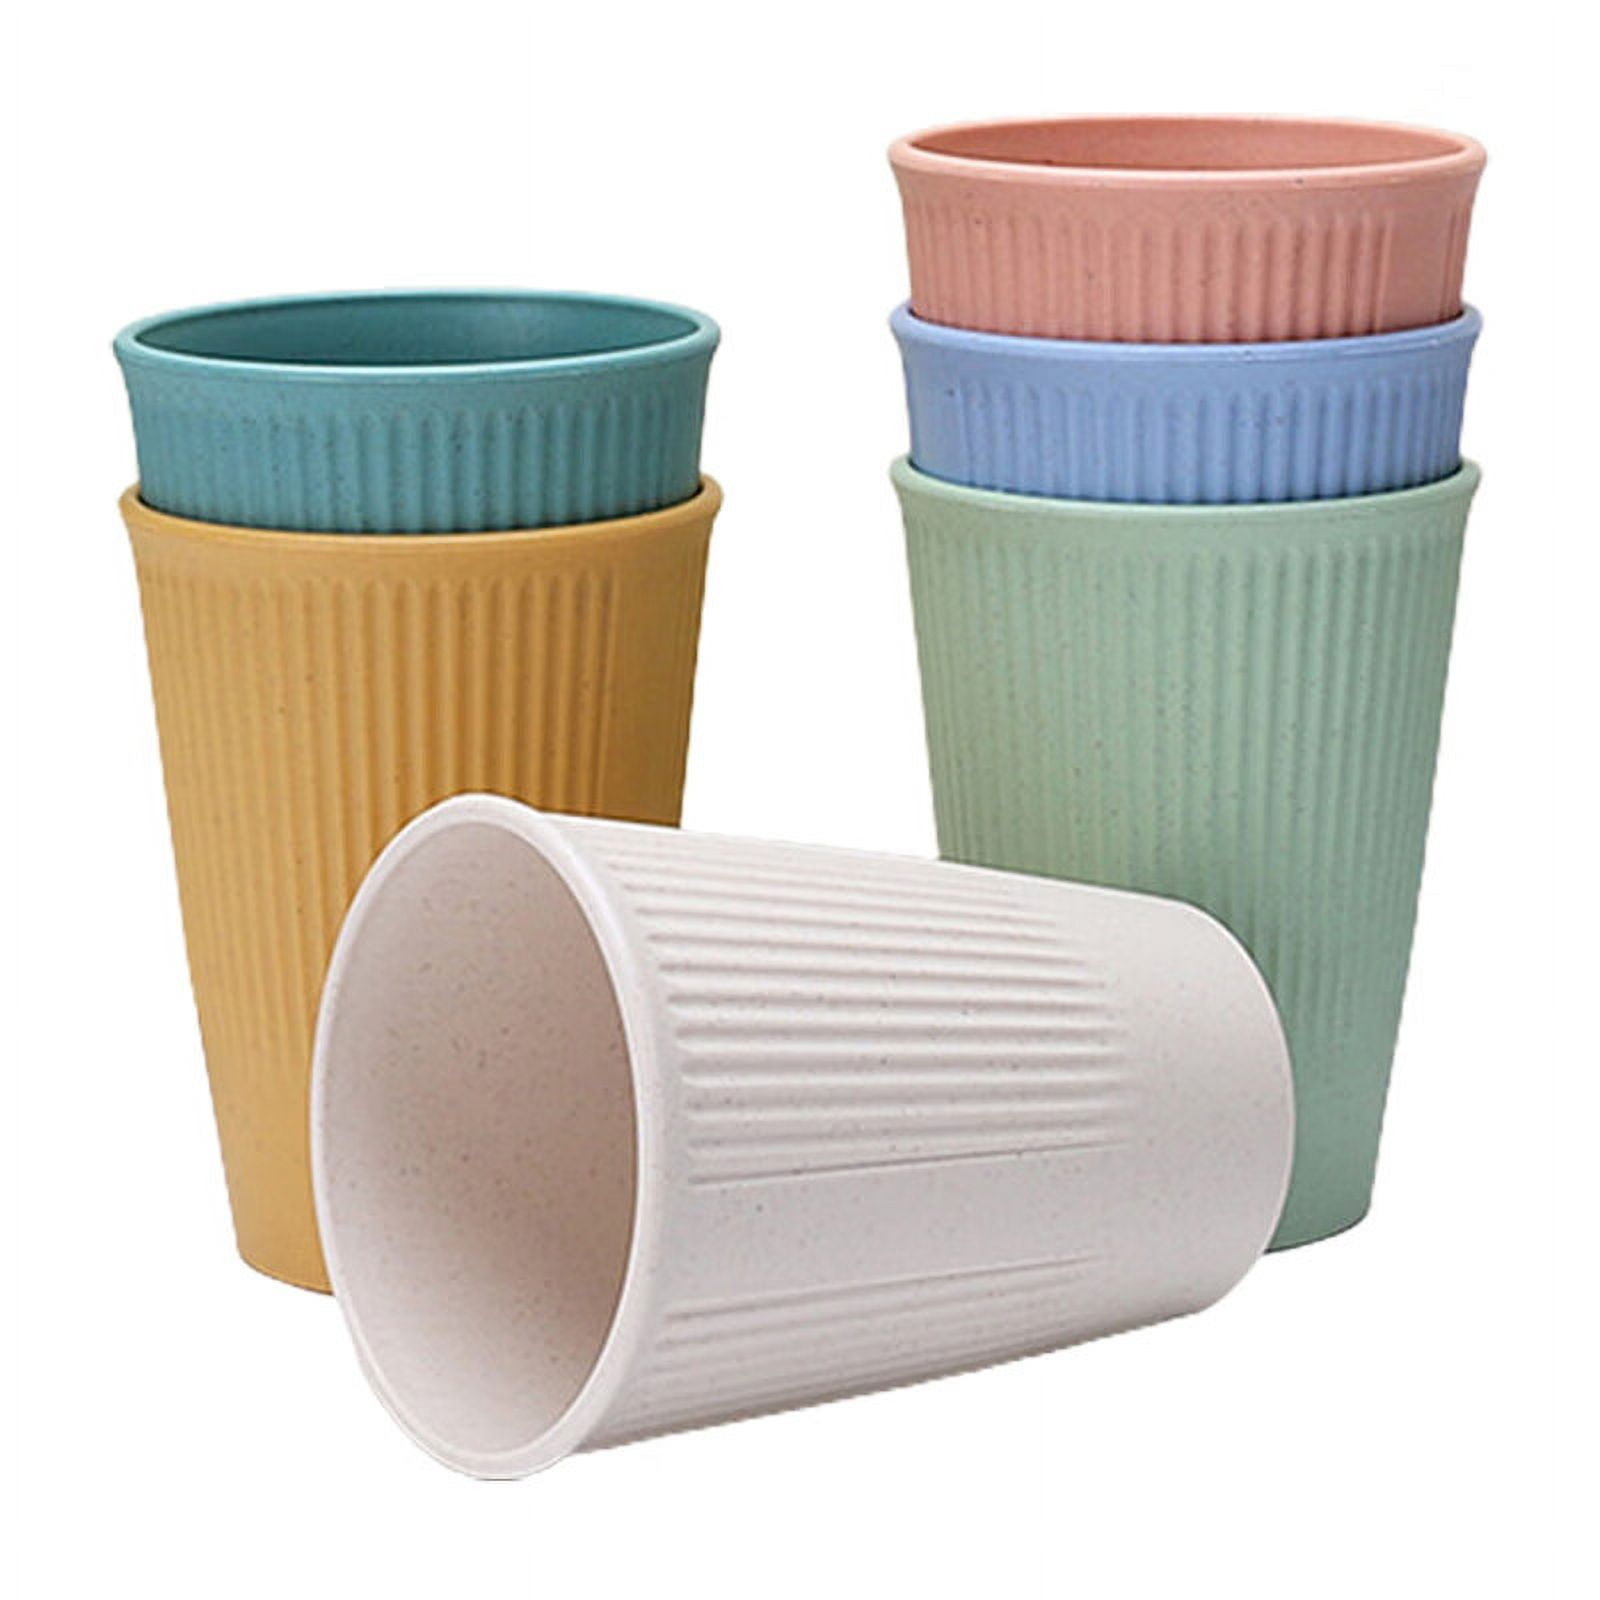 Cup Turner Rotating Display Stand for Tumblers, 360 Degree